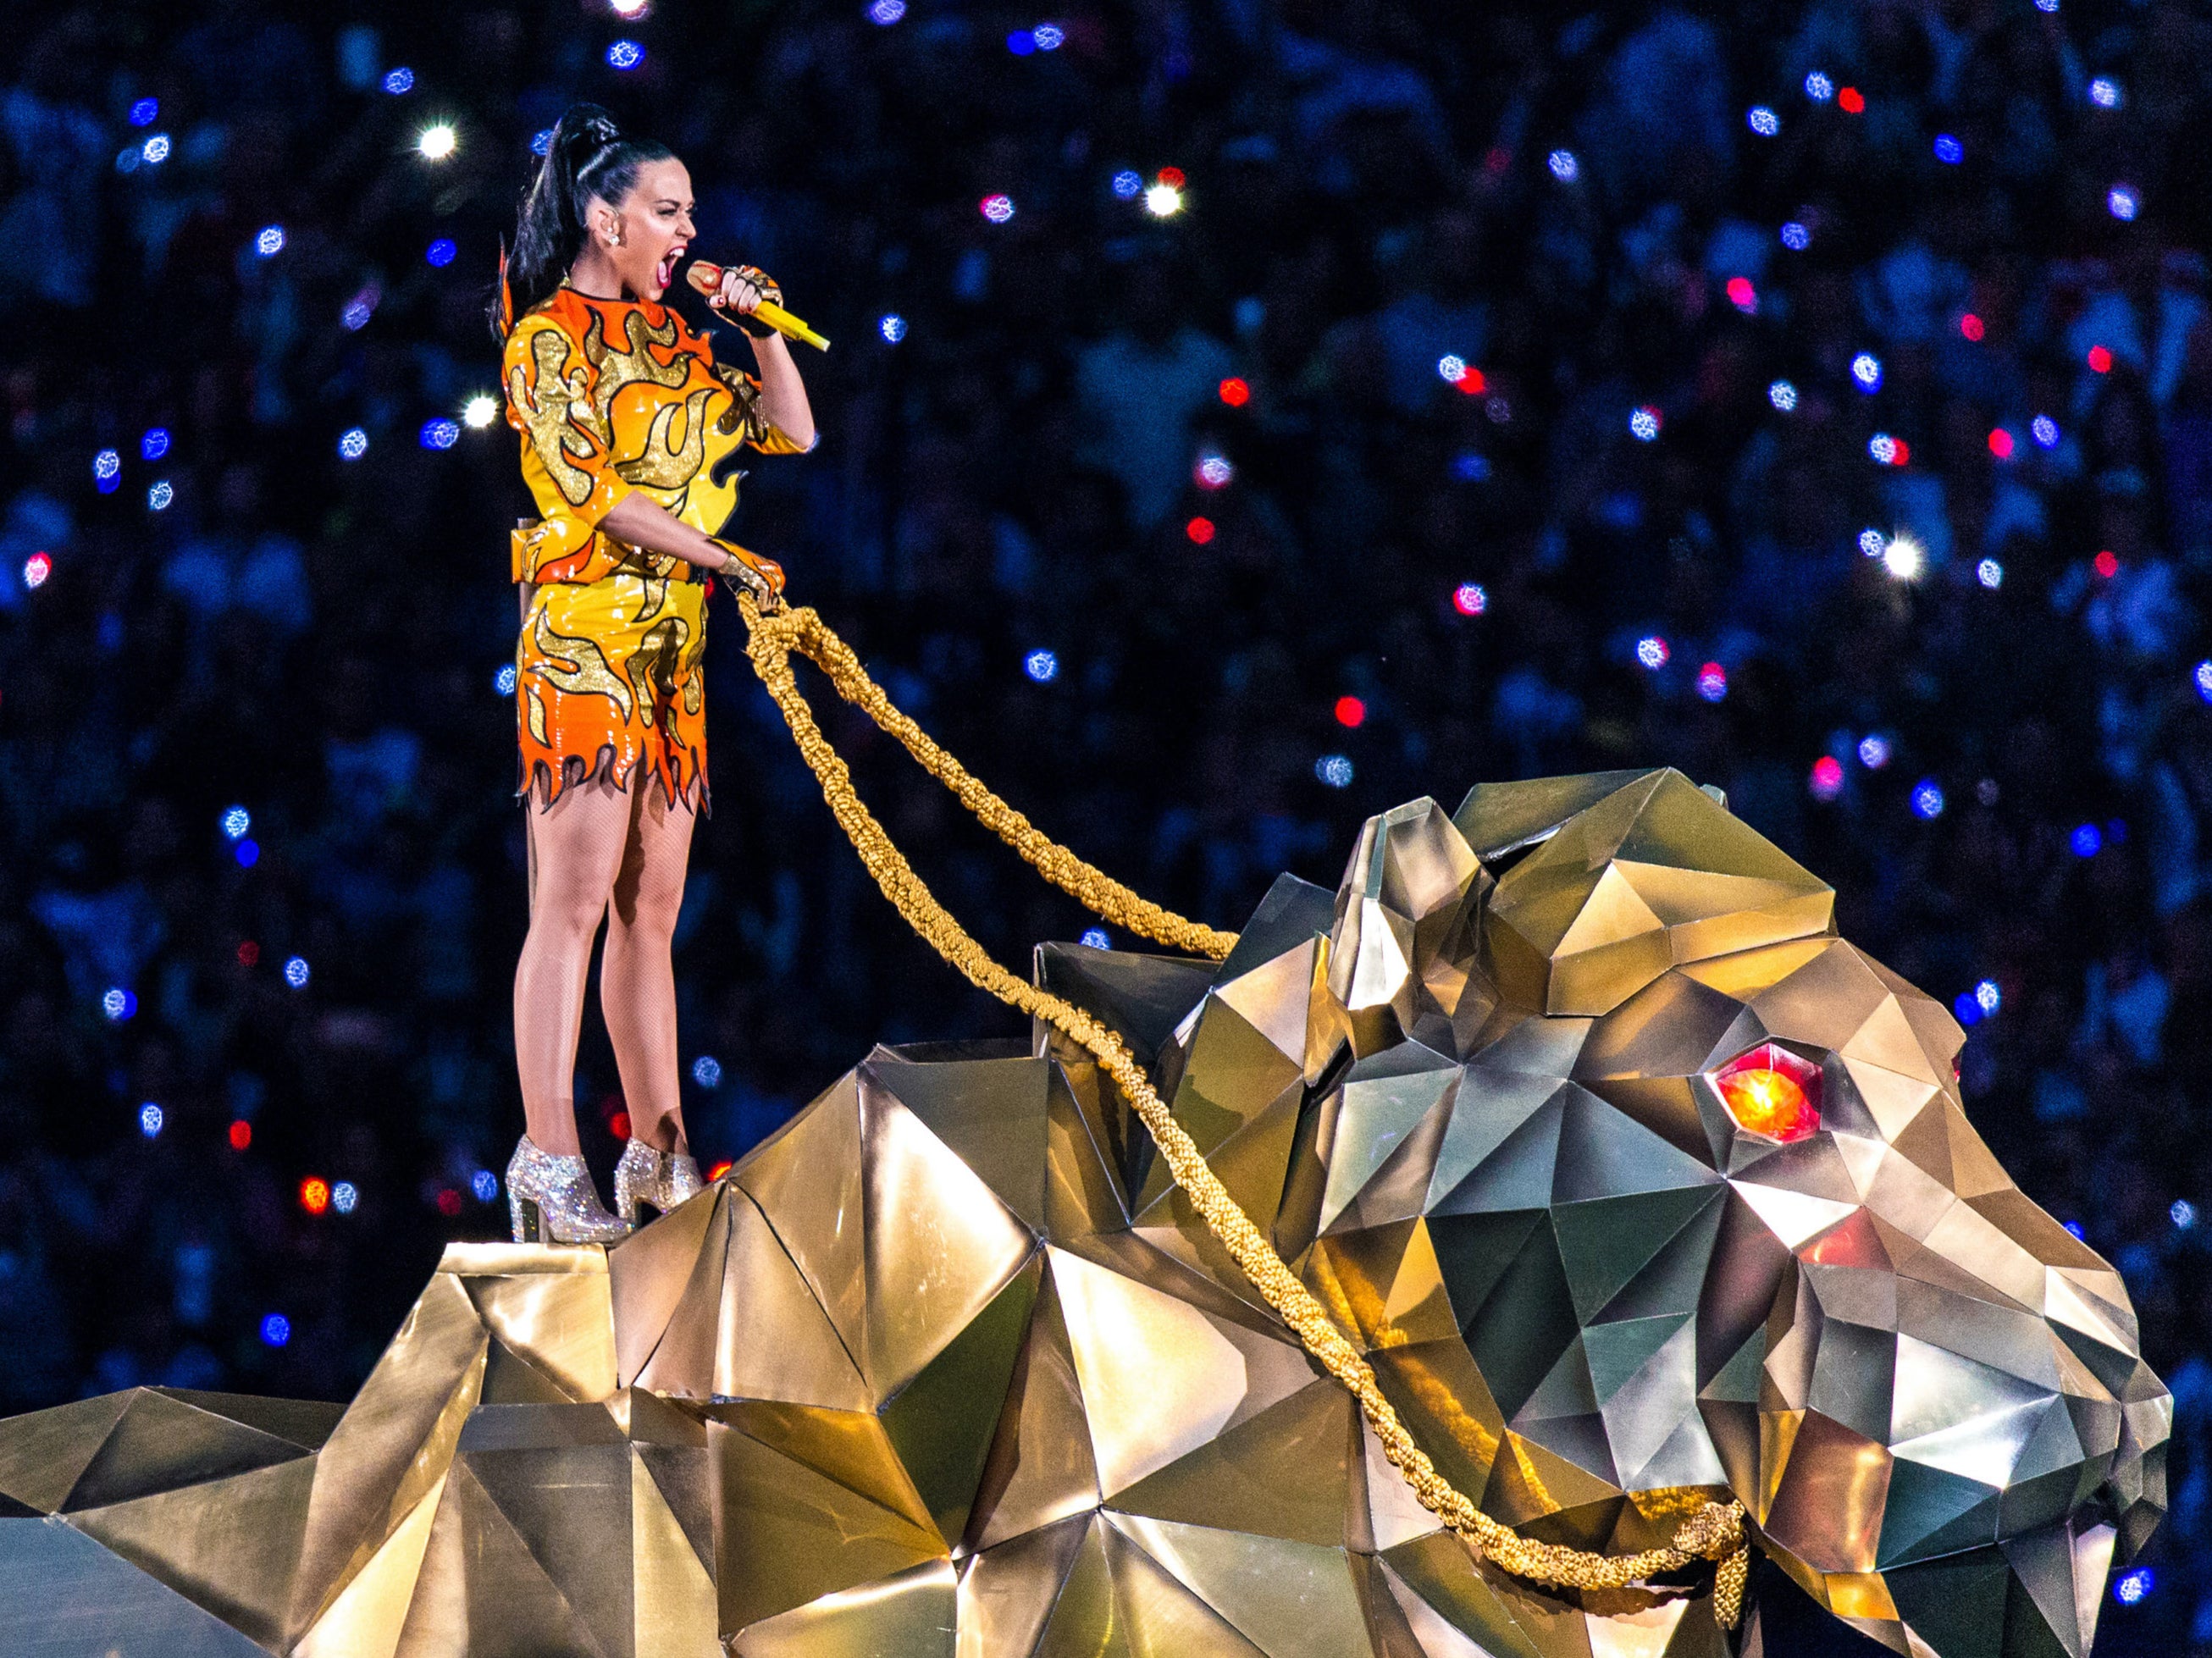 Katy Perry performing at the 2015 Super Bowl